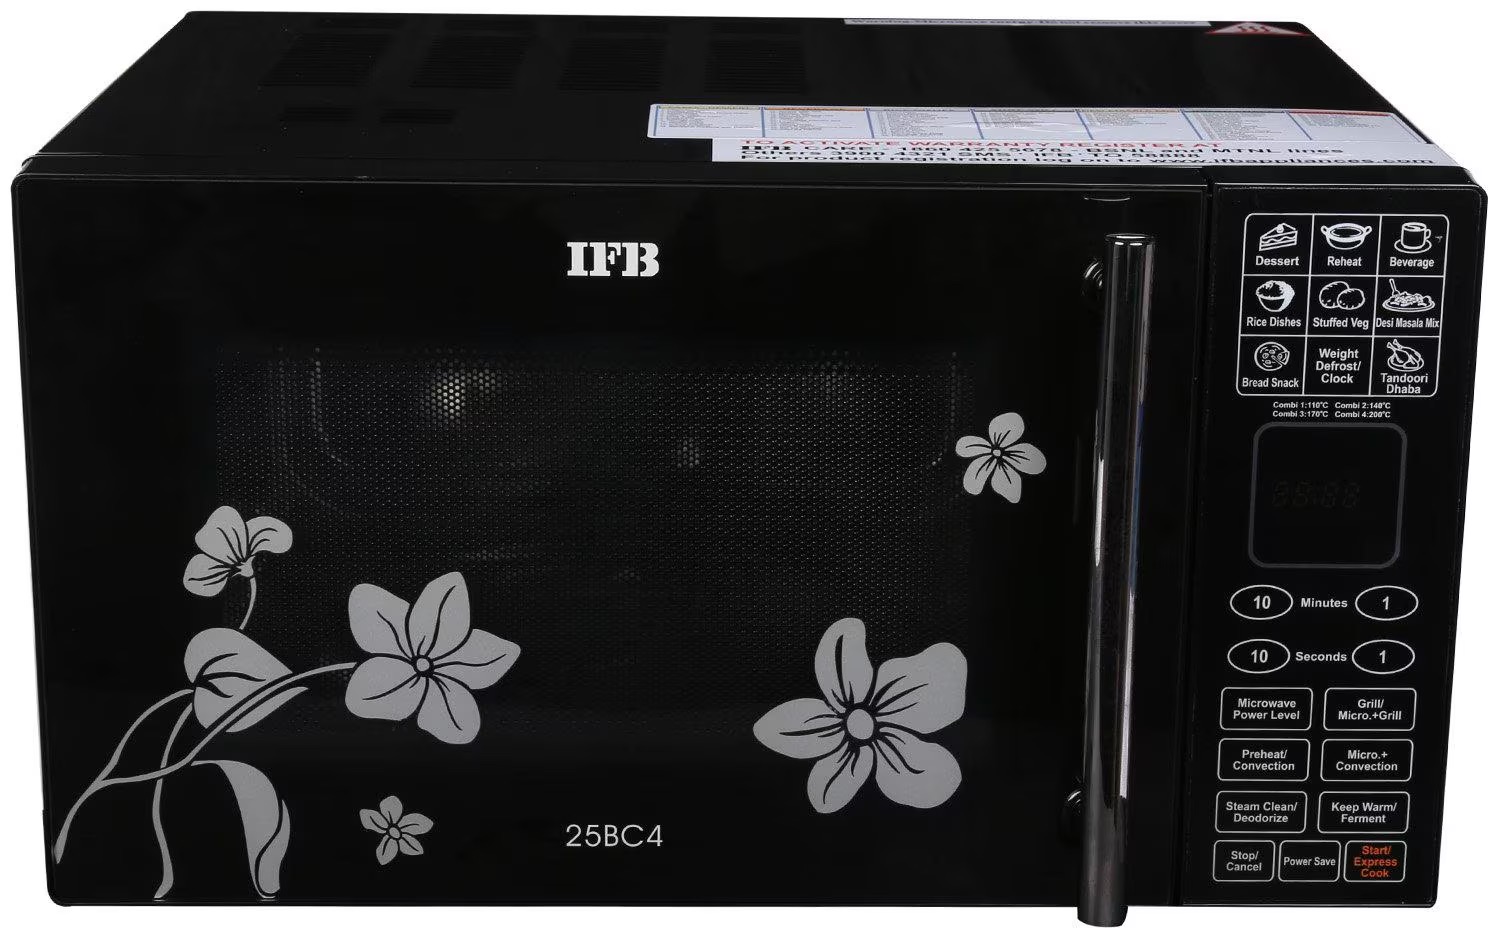 How To Preheat IFB 25Sc3 Microwave Oven